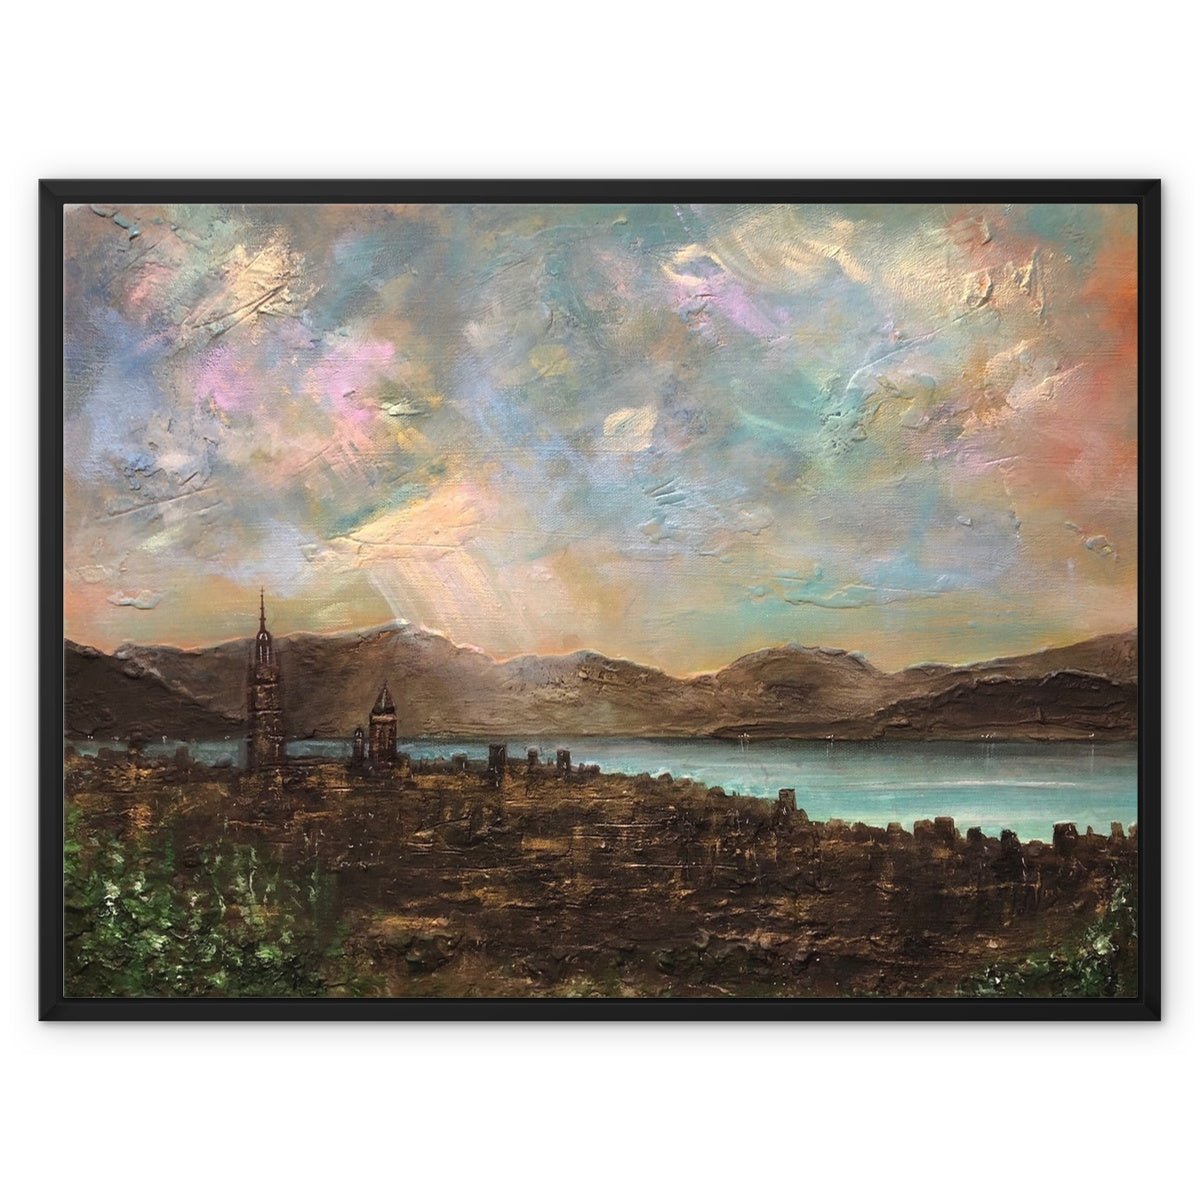 Angels Fingers Over Greenock Painting | Framed Canvas-Floating Framed Canvas Prints-River Clyde Art Gallery-32"x24"-Black Frame-Paintings, Prints, Homeware, Art Gifts From Scotland By Scottish Artist Kevin Hunter